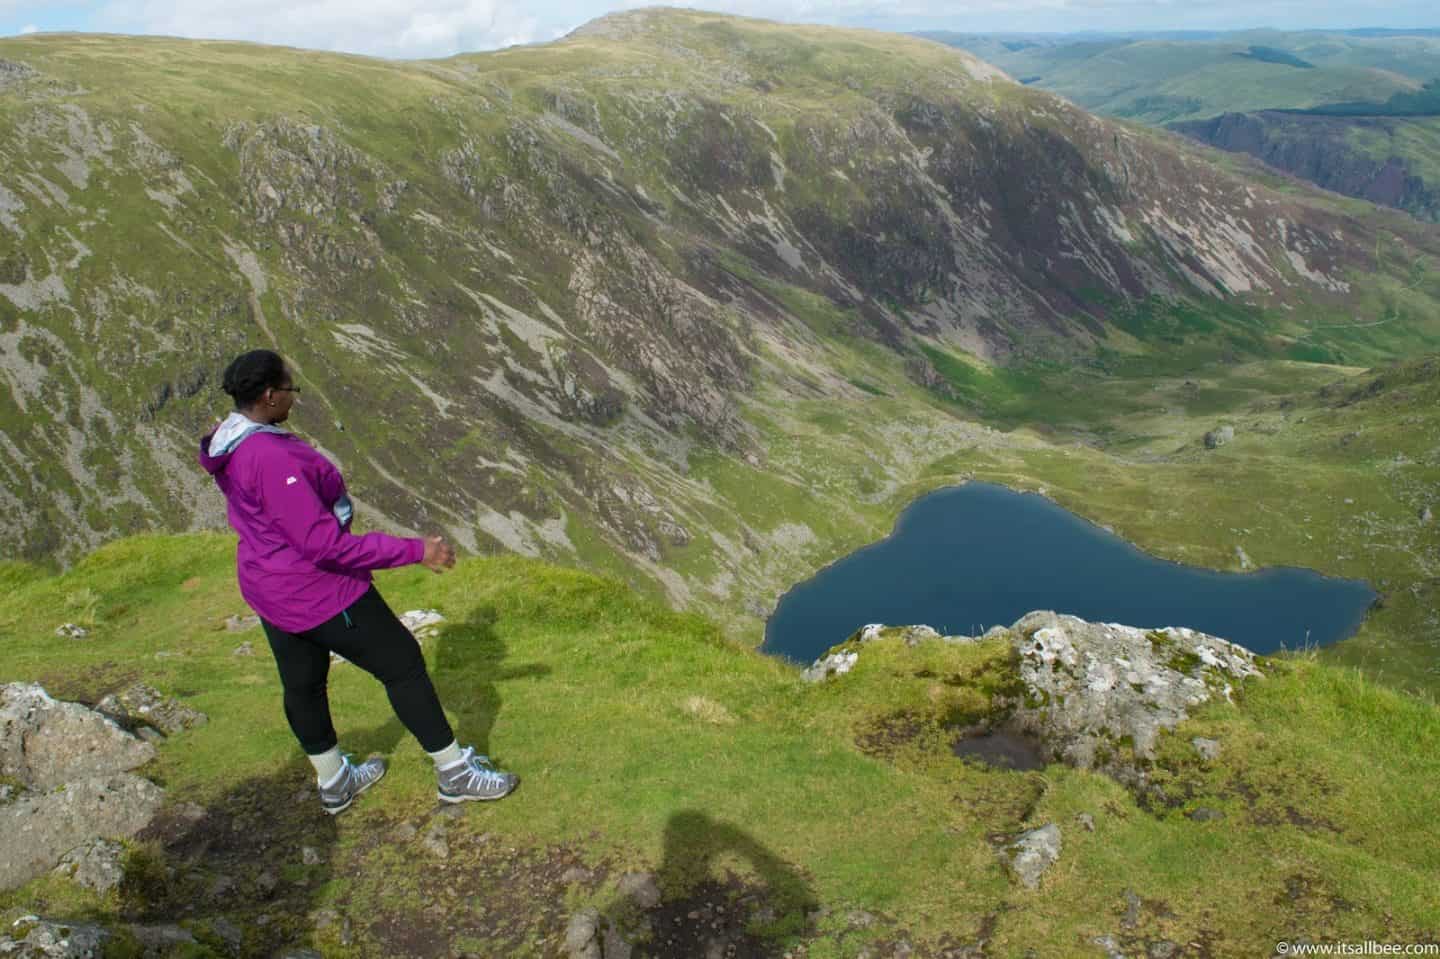 Cadair Idris hiking adventures with views of mountains in Snowdonia